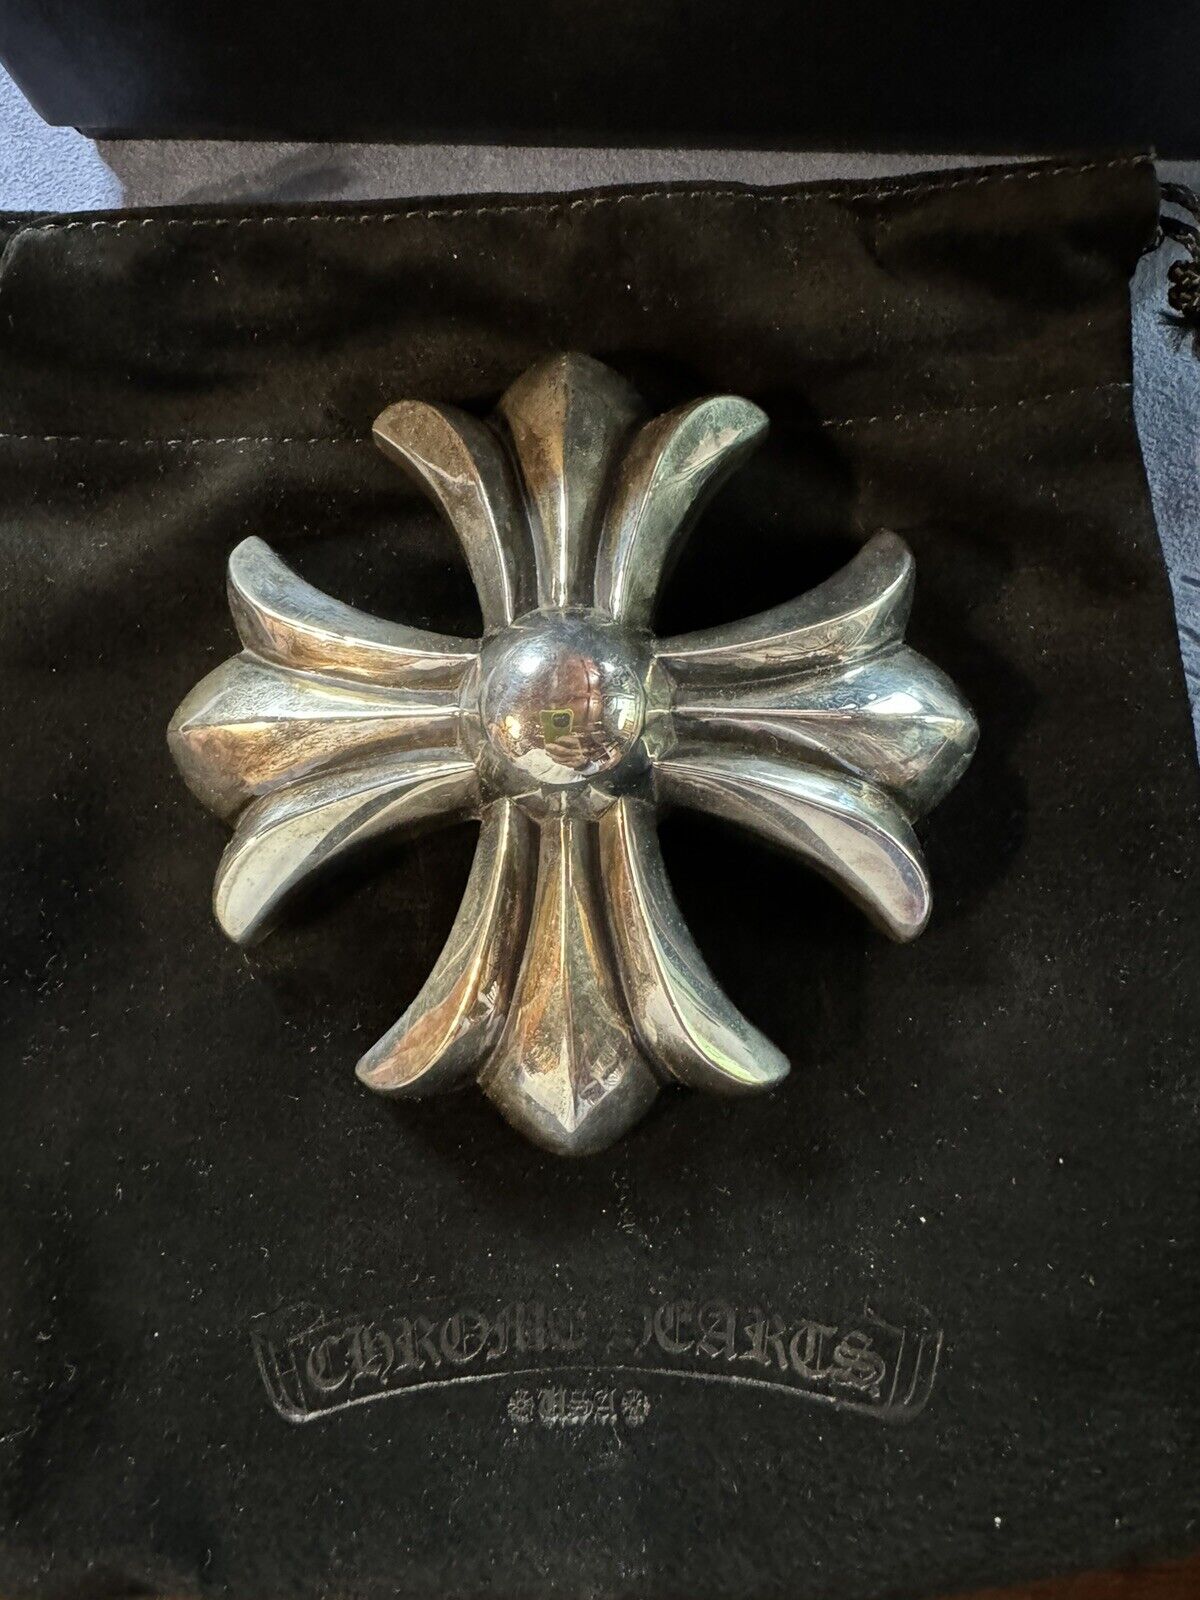 CHROME HEARTS Large Heavy Silver Paper Weight W/Original Suede Pouch And Box